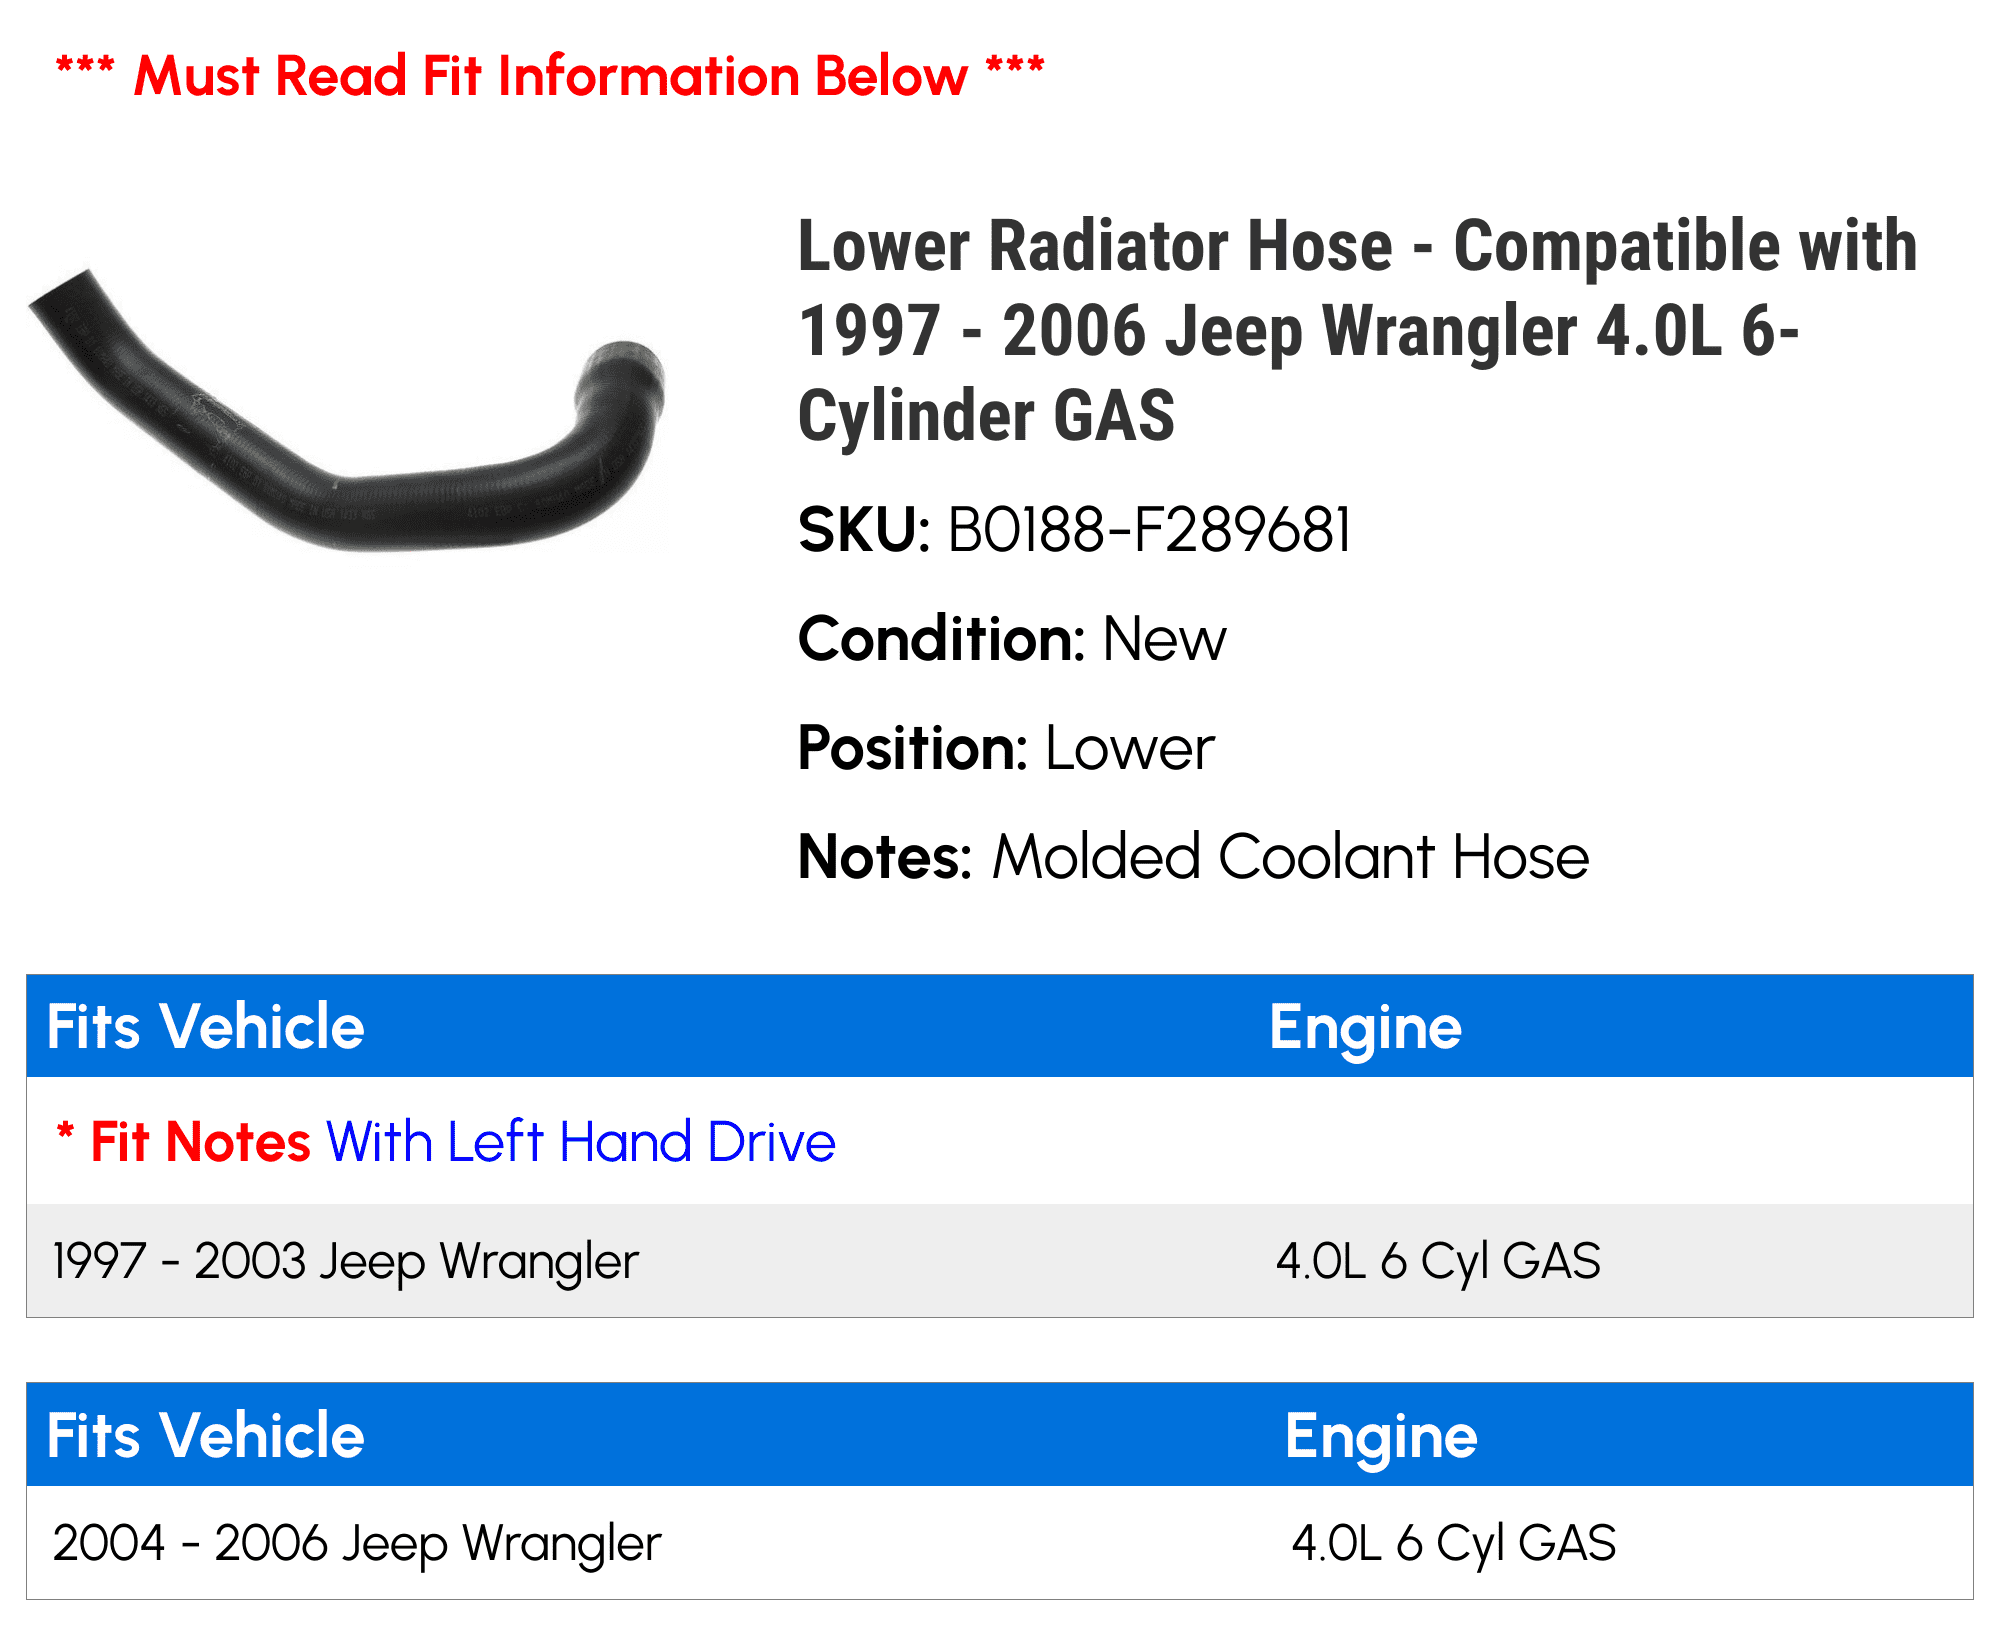 Lower Radiator Hose - Compatible with 1997 - 2006 Jeep Wrangler   6-Cylinder GAS 1998 1999 2000 2001 2002 2003 2004 2005 